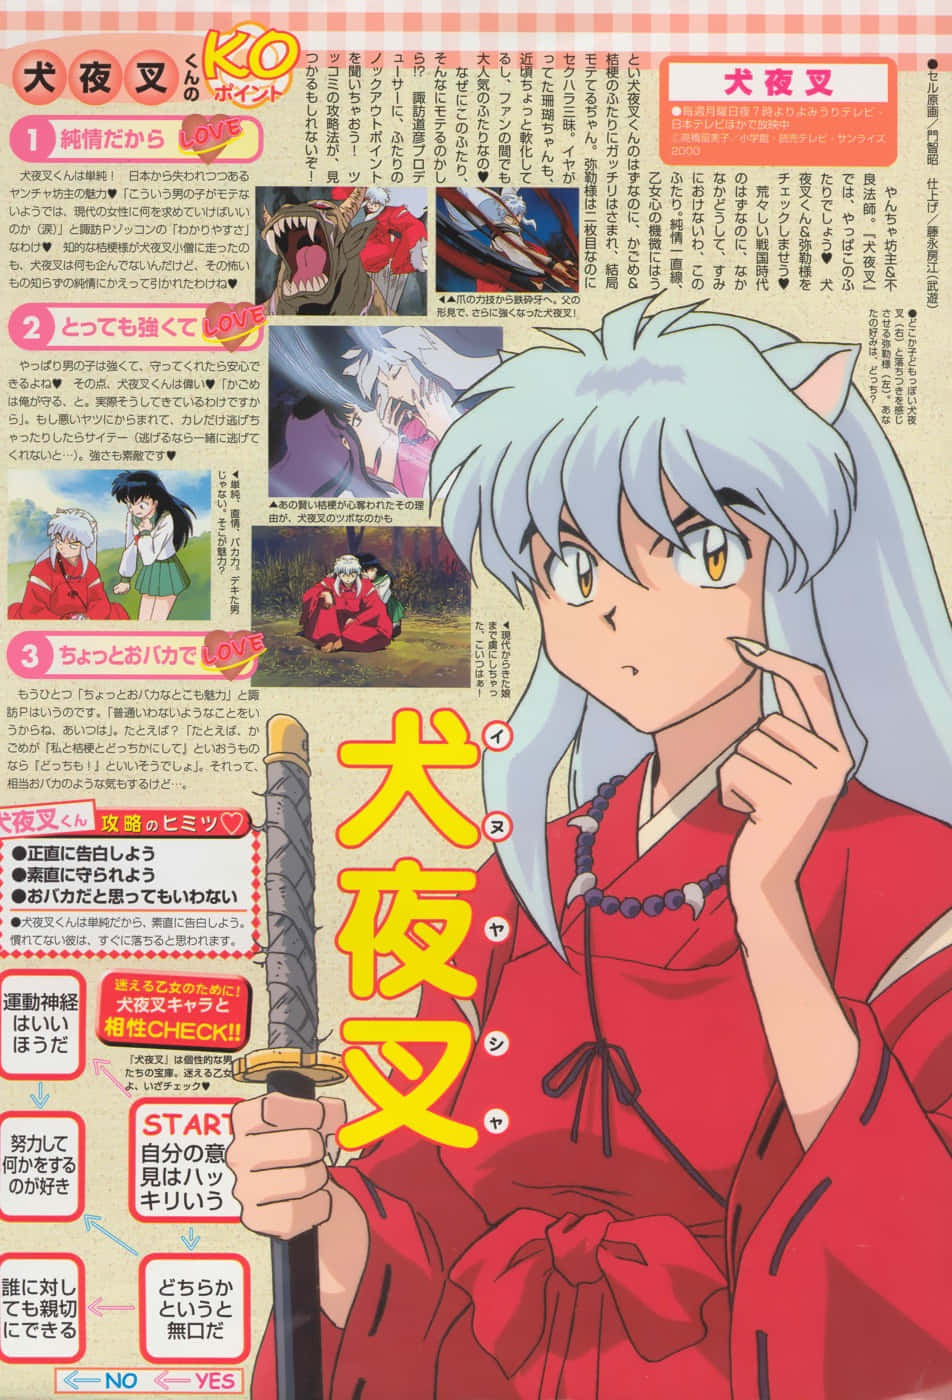 Inuyasha and his friends posing together for a group picture Wallpaper